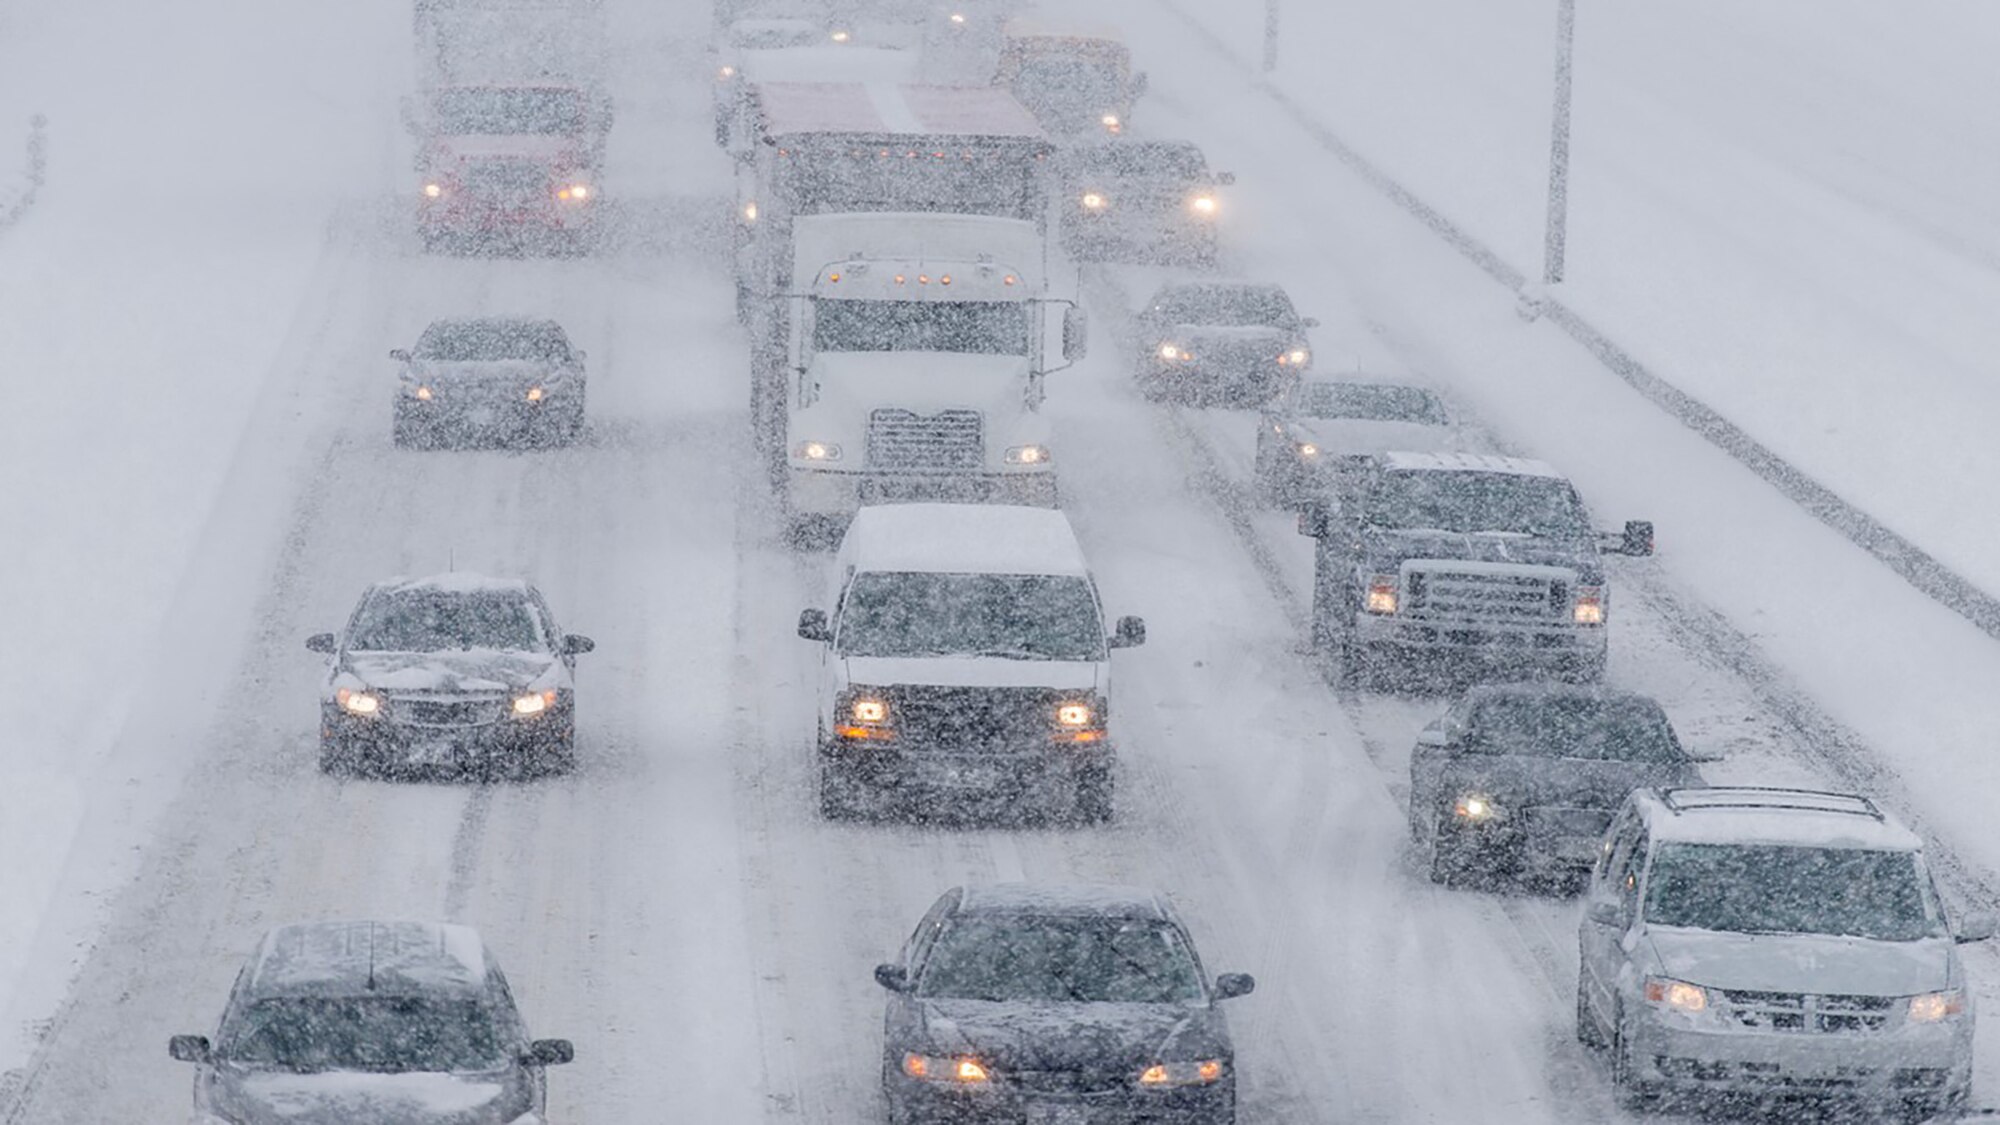 Operating a vehicle can be one of the riskiest things we do each day. Compound this with the dangers of winter weather hazards, and it can be costly.